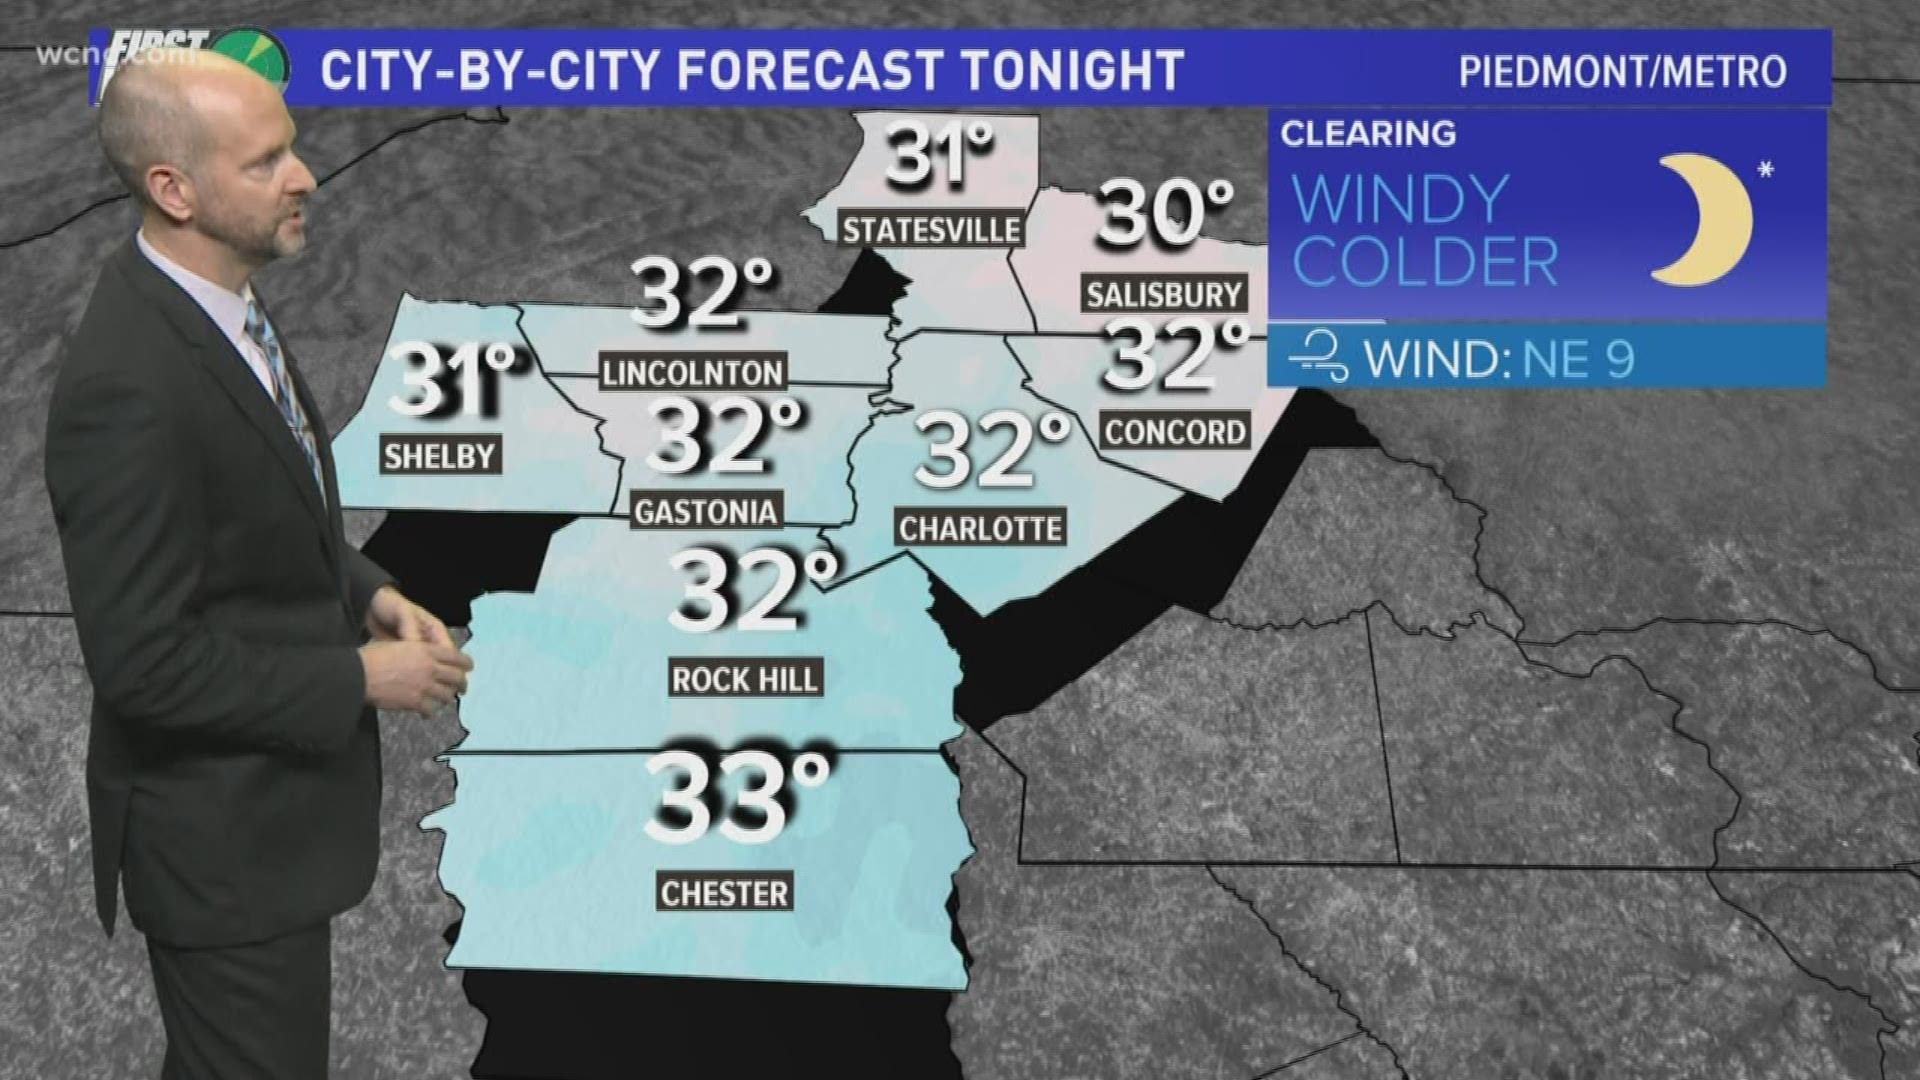 Charlotte weather forecast calls for colder temperatures